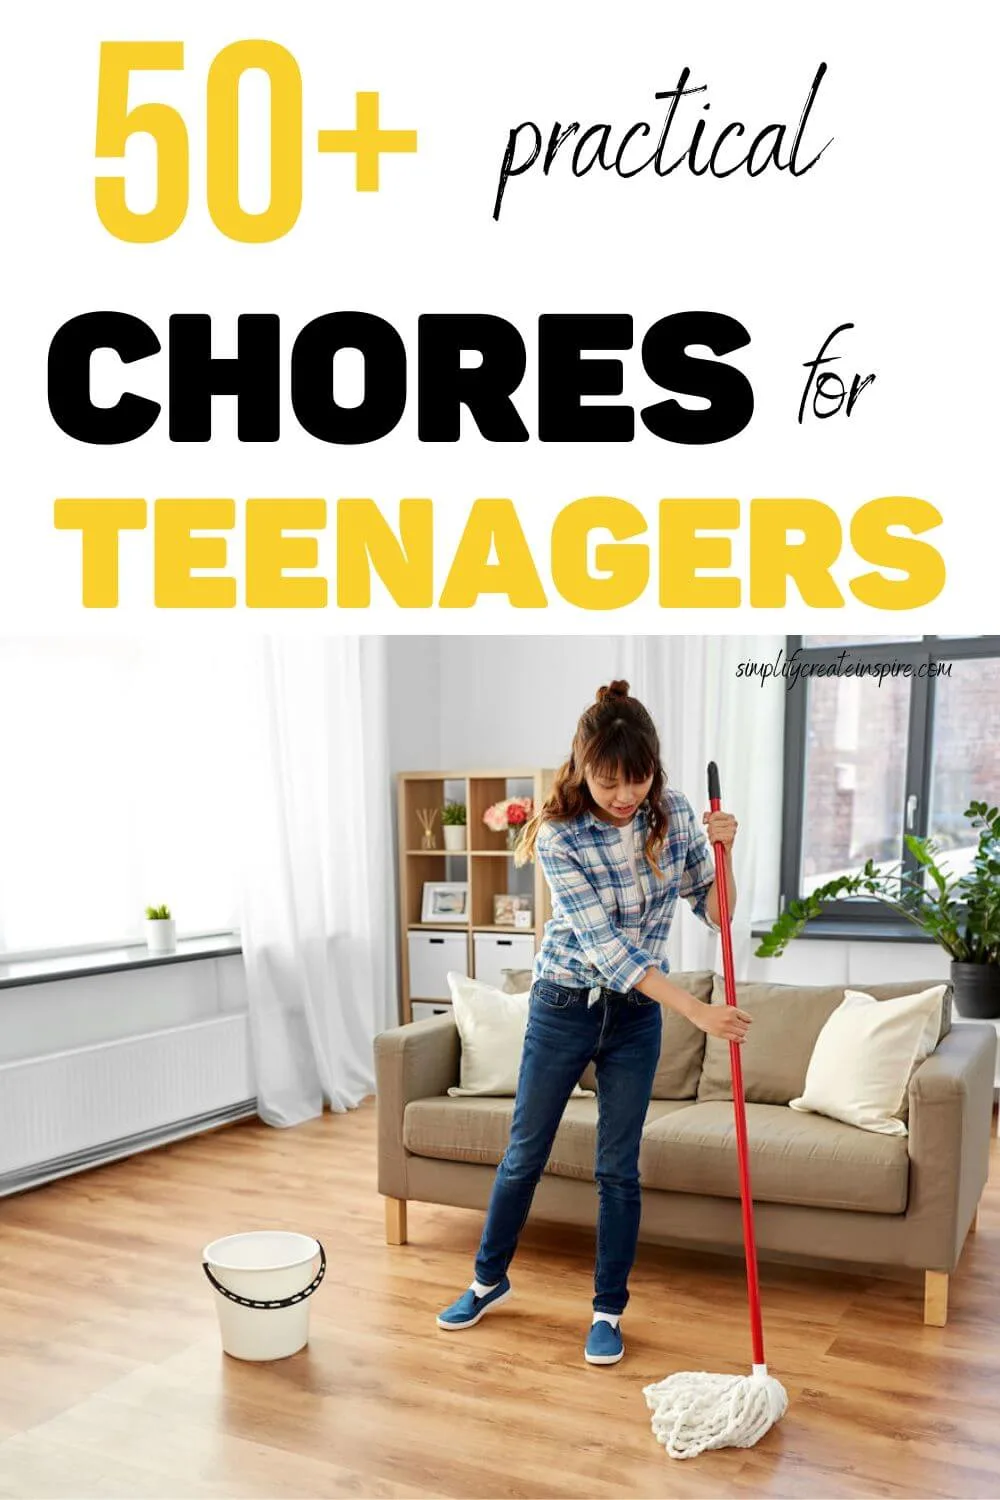 Pinterest image - 50+ practical chores for teenagers